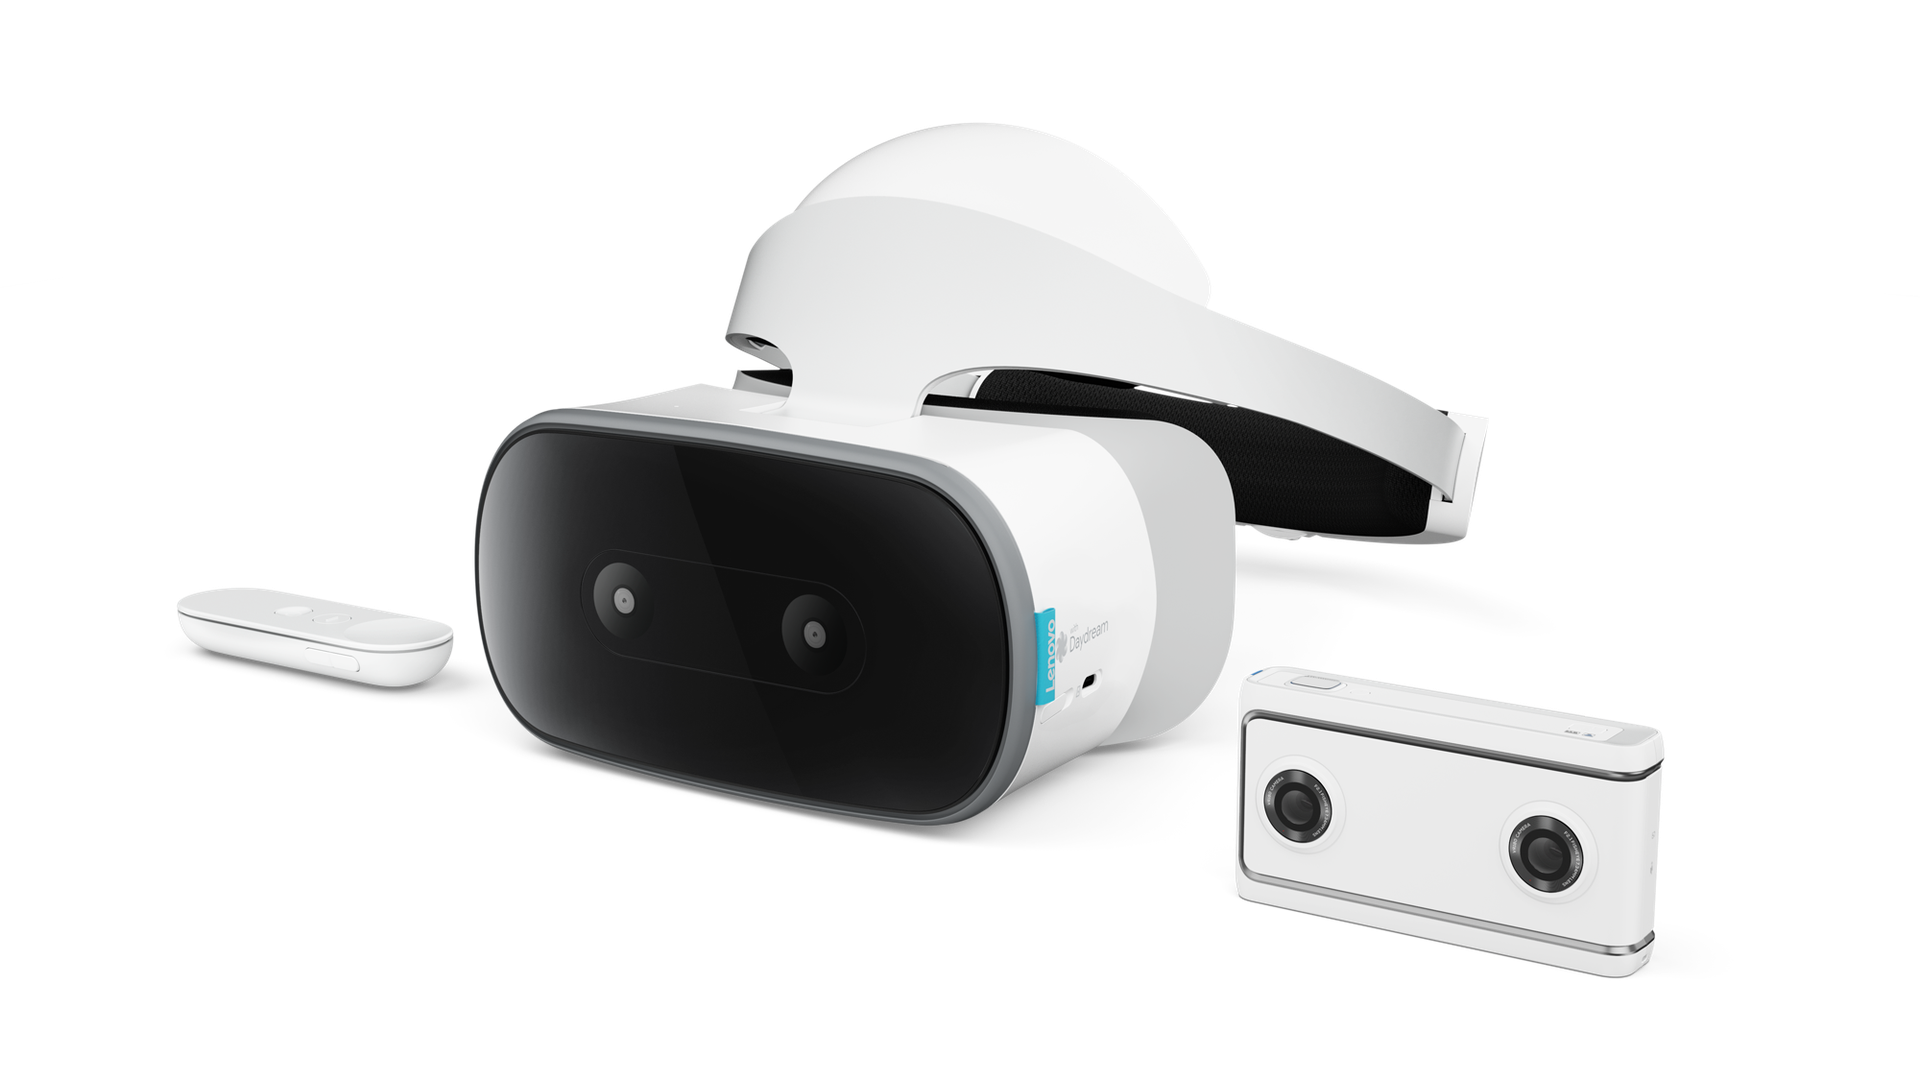 Lenovo's new standalone VR headset and 180-degree camera, developed with Google 